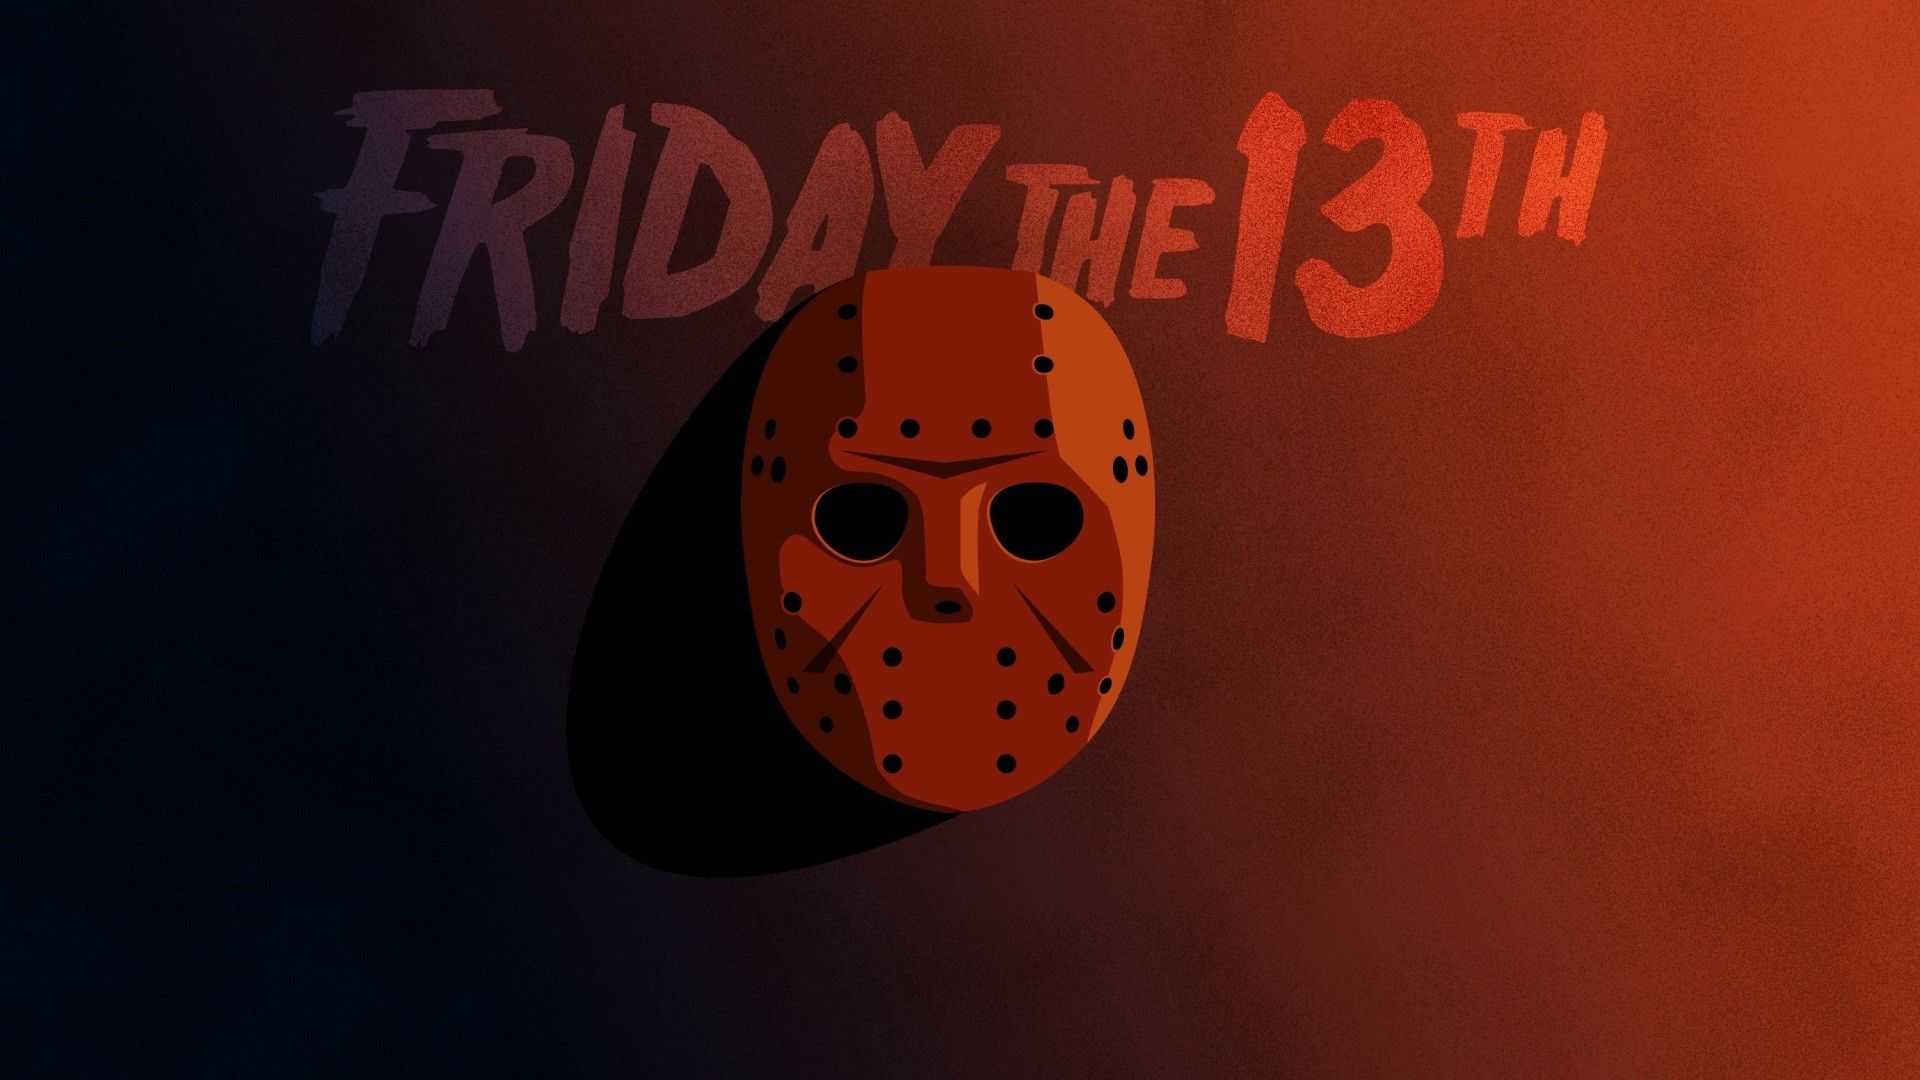 1920x1080 friday the 13th free download wallpaper for pc. Friday the 13th tattoo, Friday the 13th, Friday the 13th poster